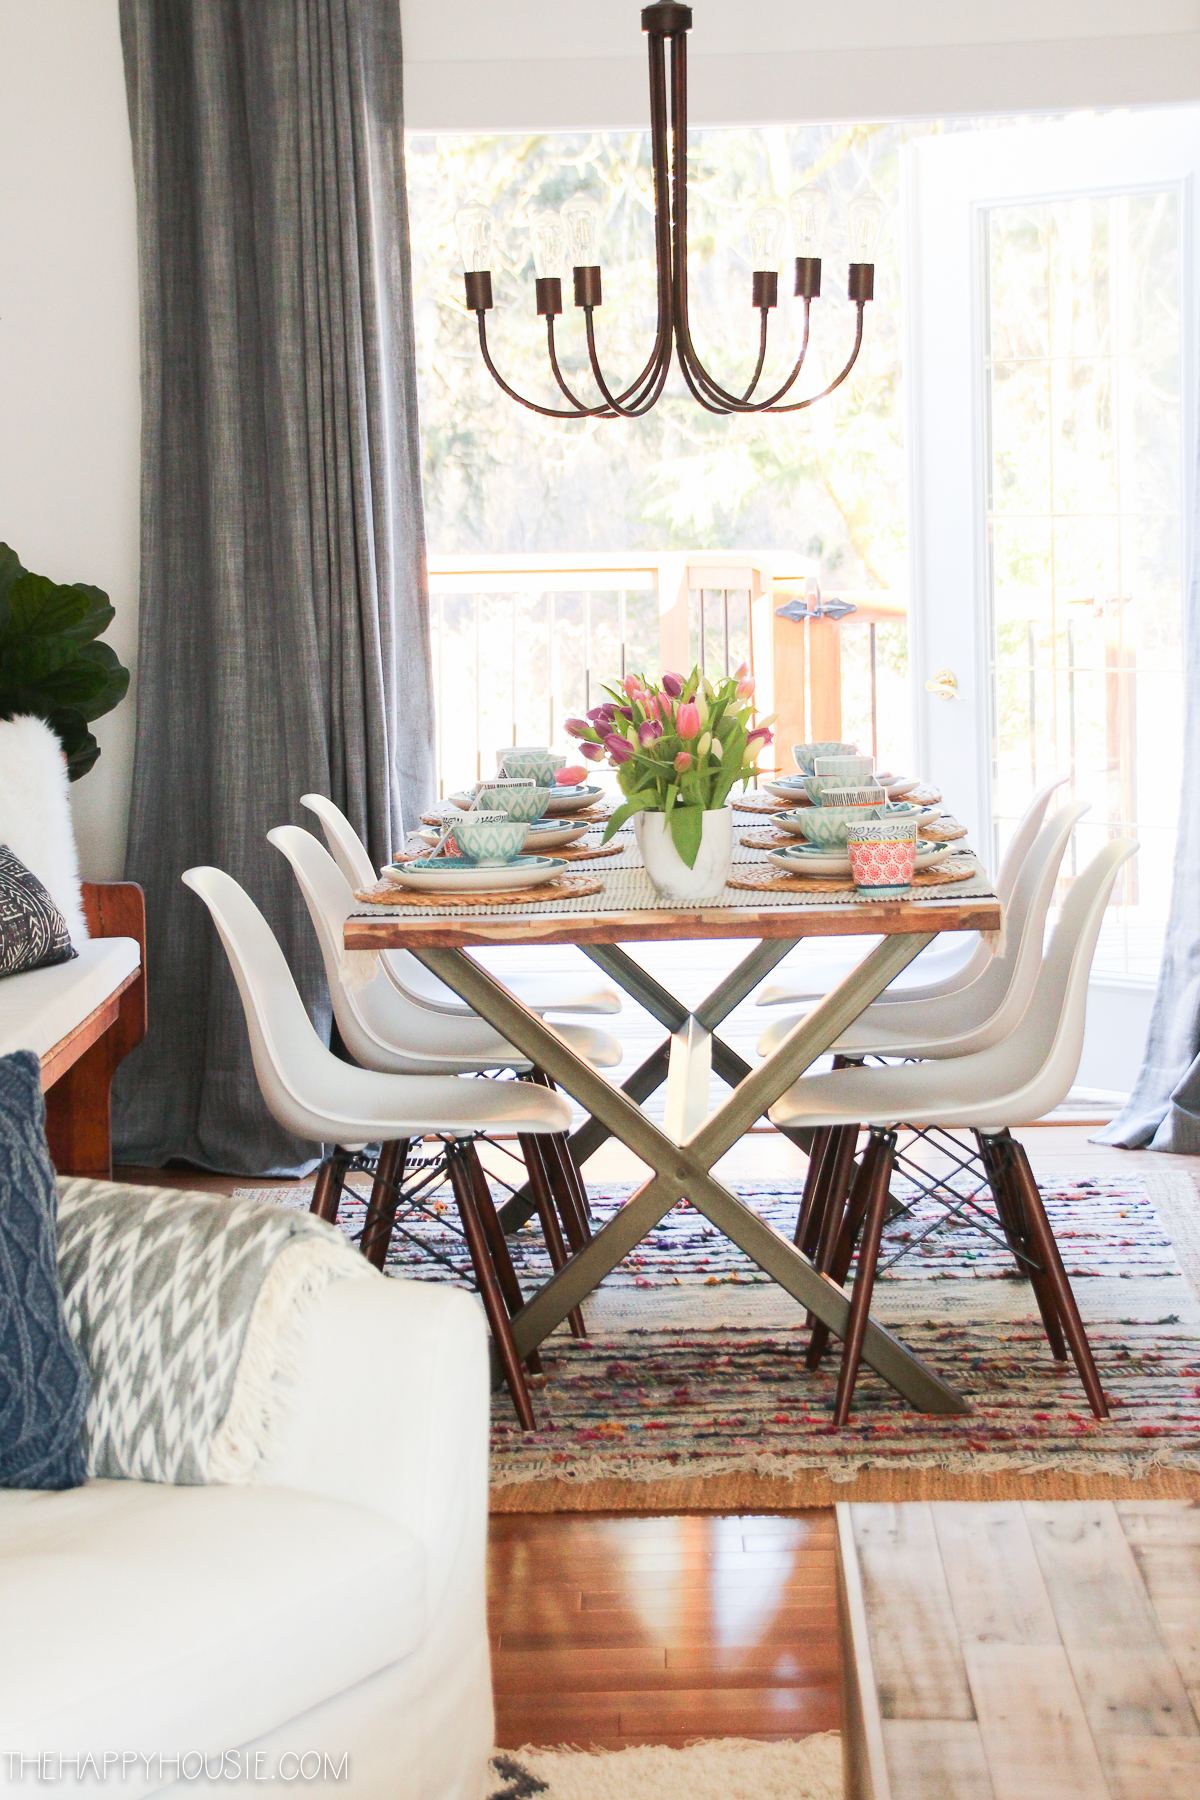 Today I am sharing our Spring dining room